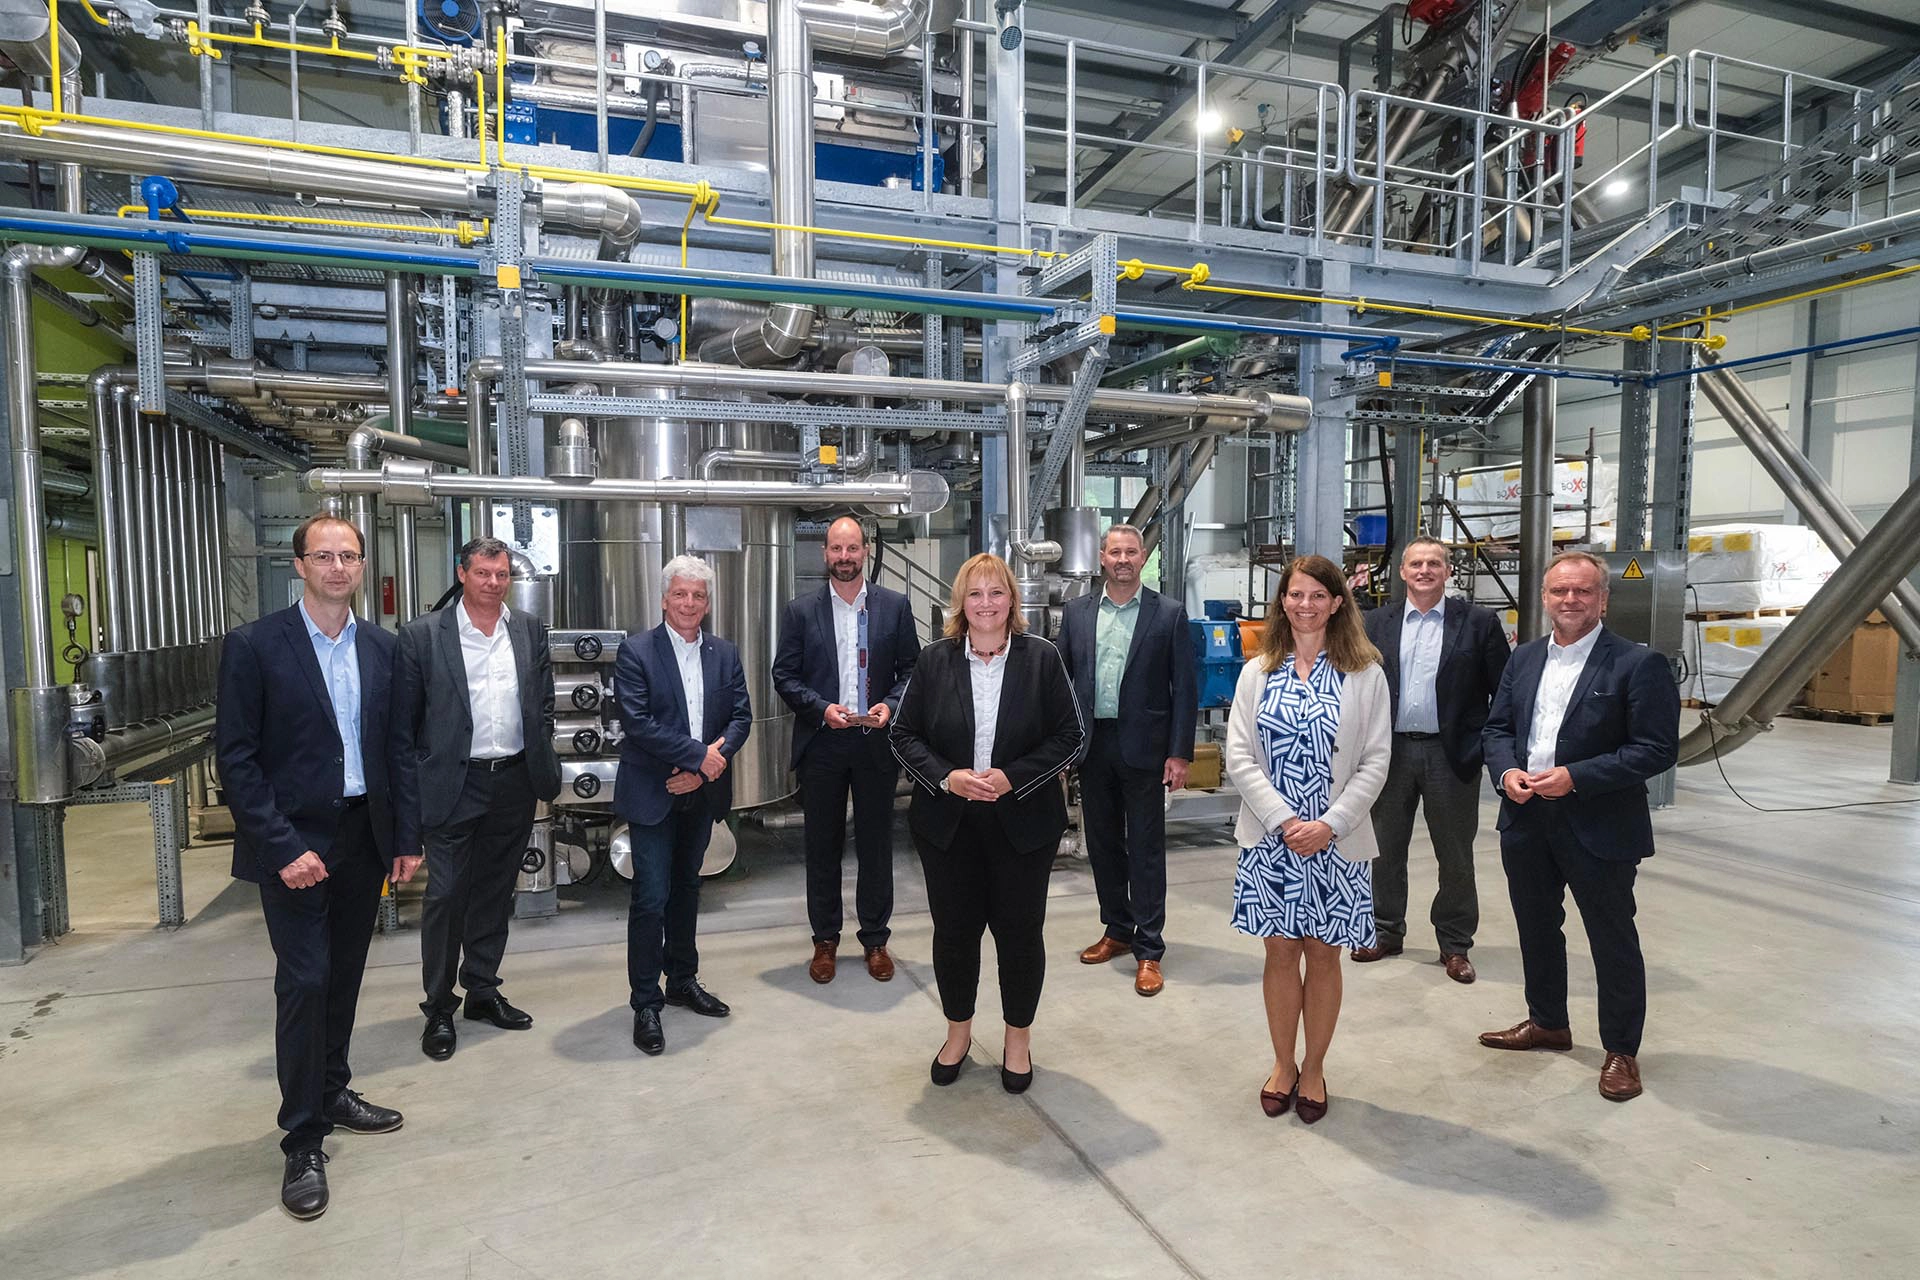 CAPHENIA produces E-fuels in Lower Saxony